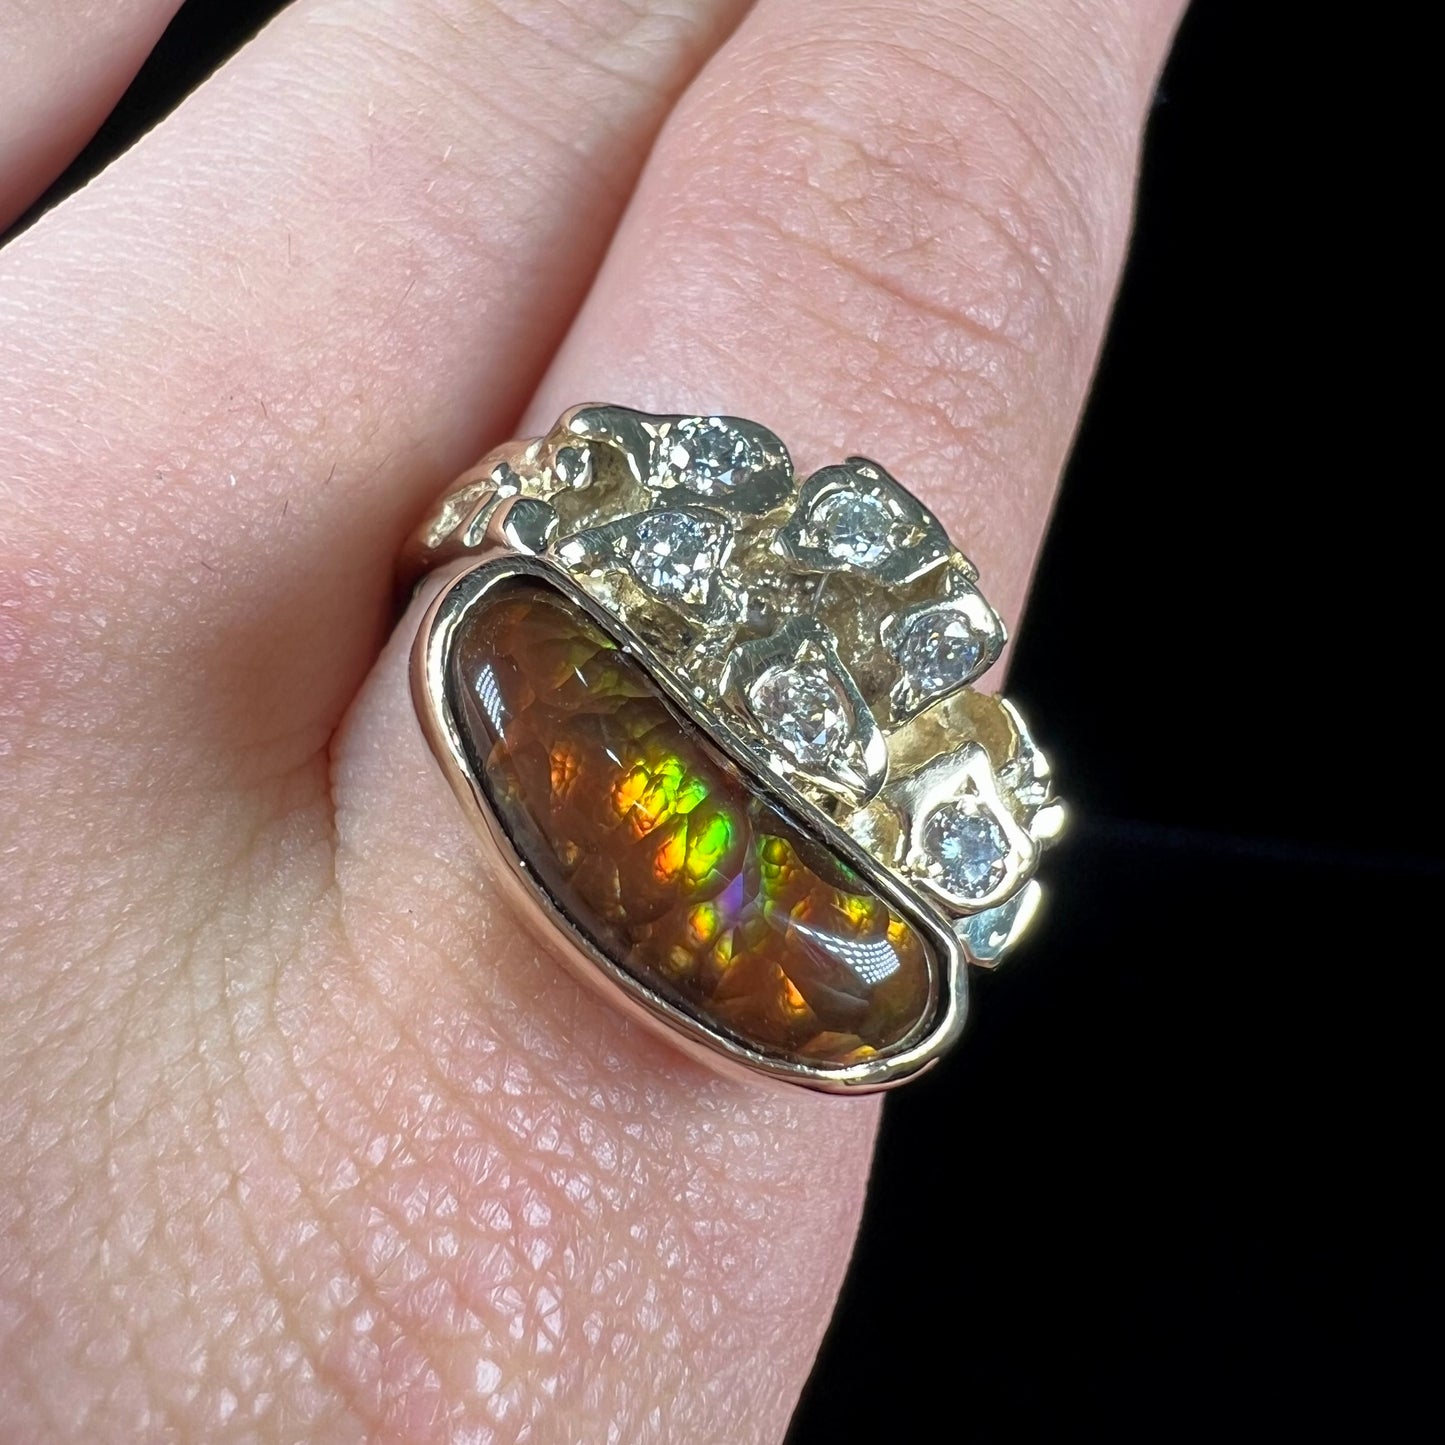 A ladies' nugget style yellow gold Mexican fire agate and diamond ring.